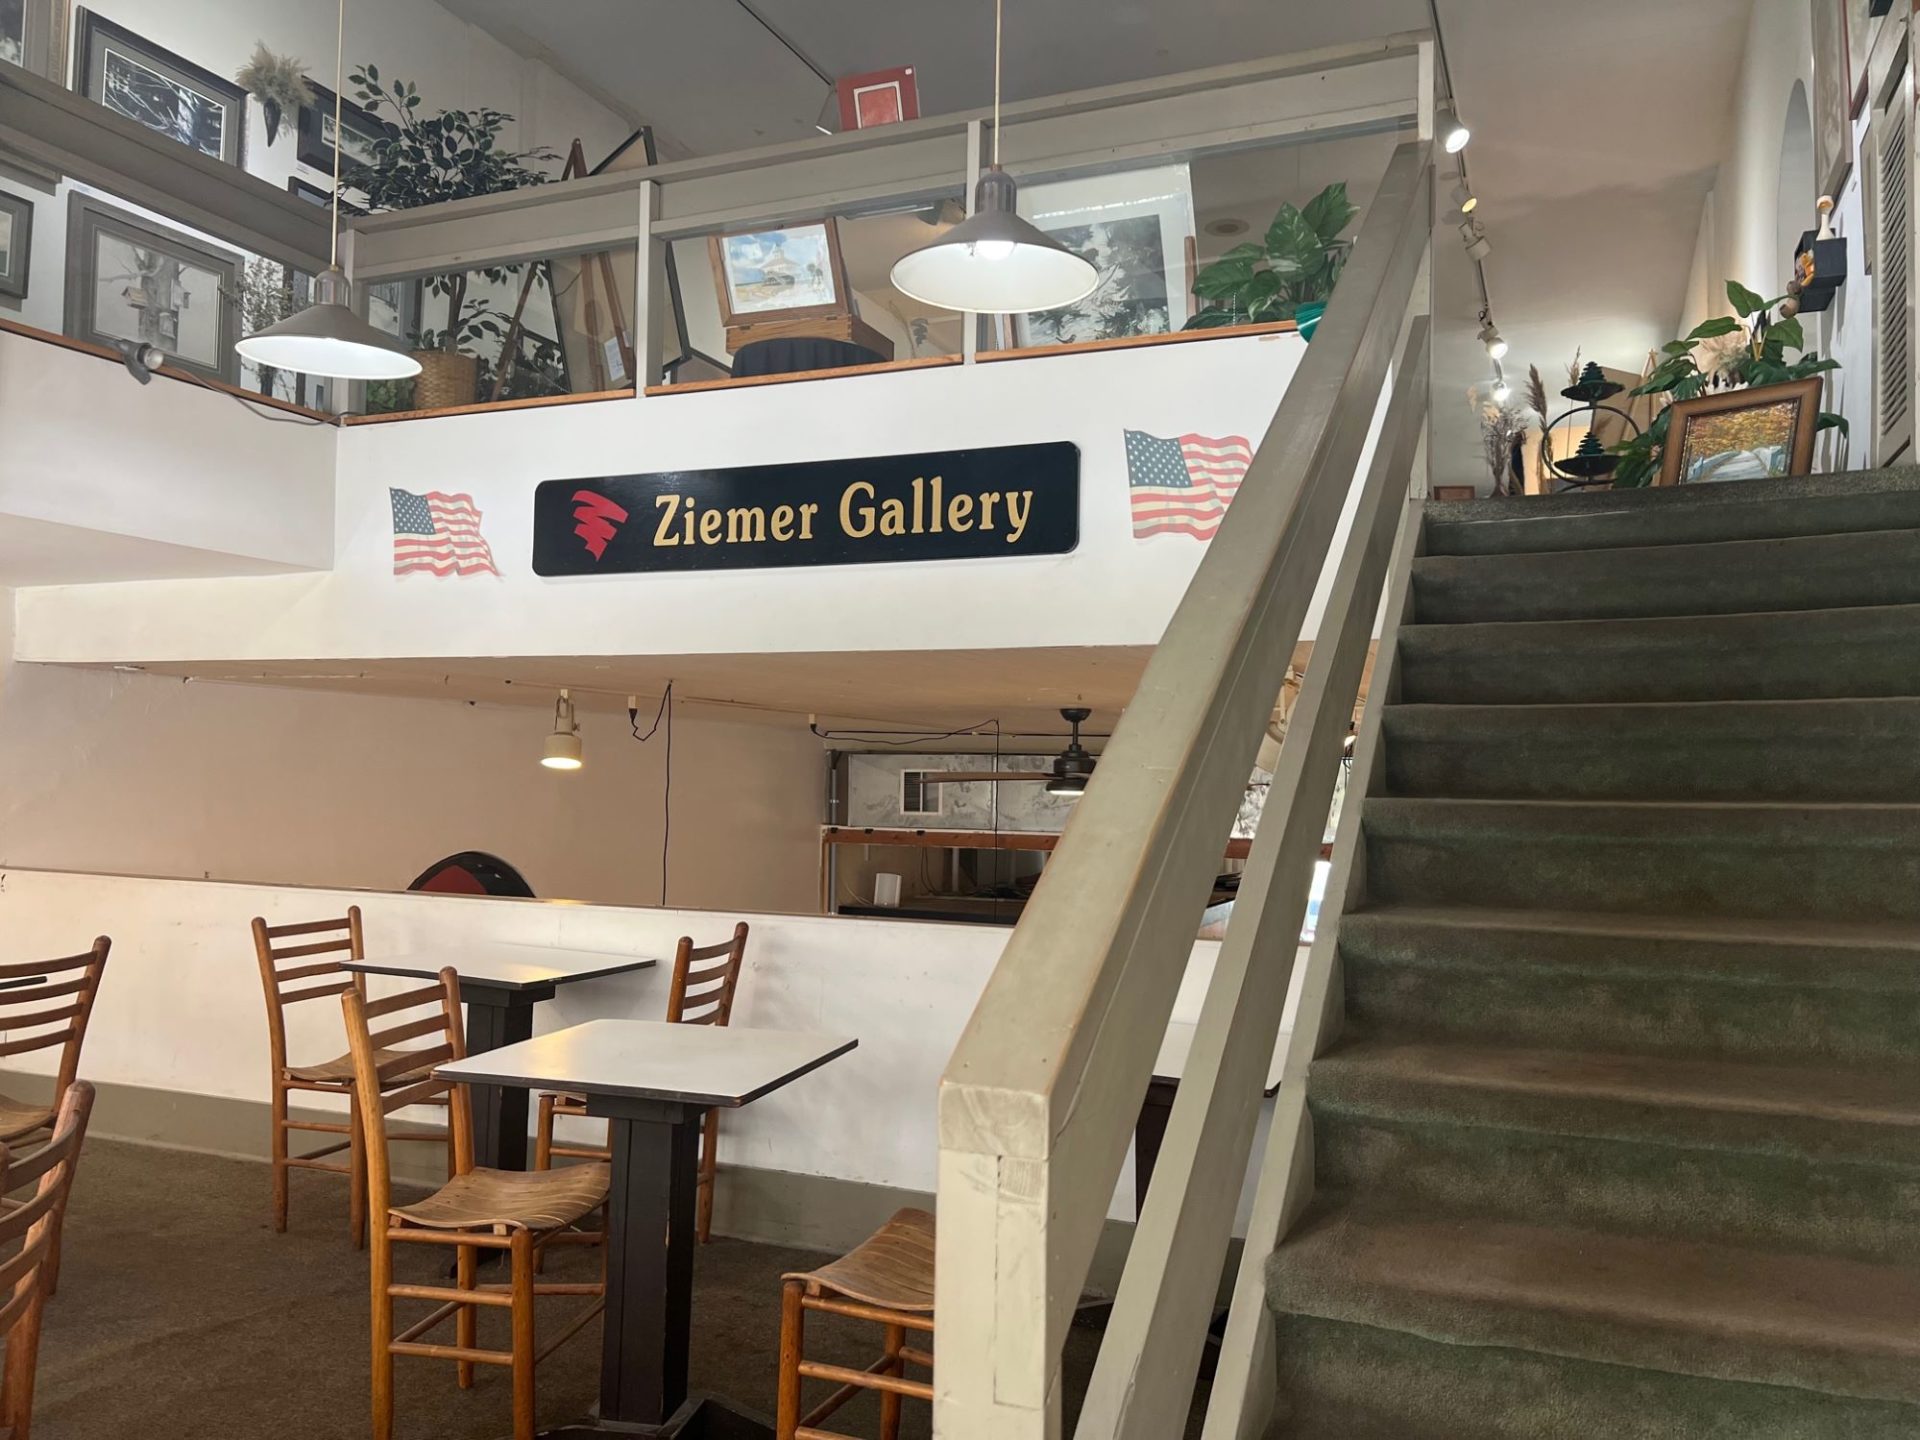 A set of gray carpeted stairs lead up to an art gallery. On a white wall below the gallery there is a black sign that says Ziemer Gallery in gold lettering.